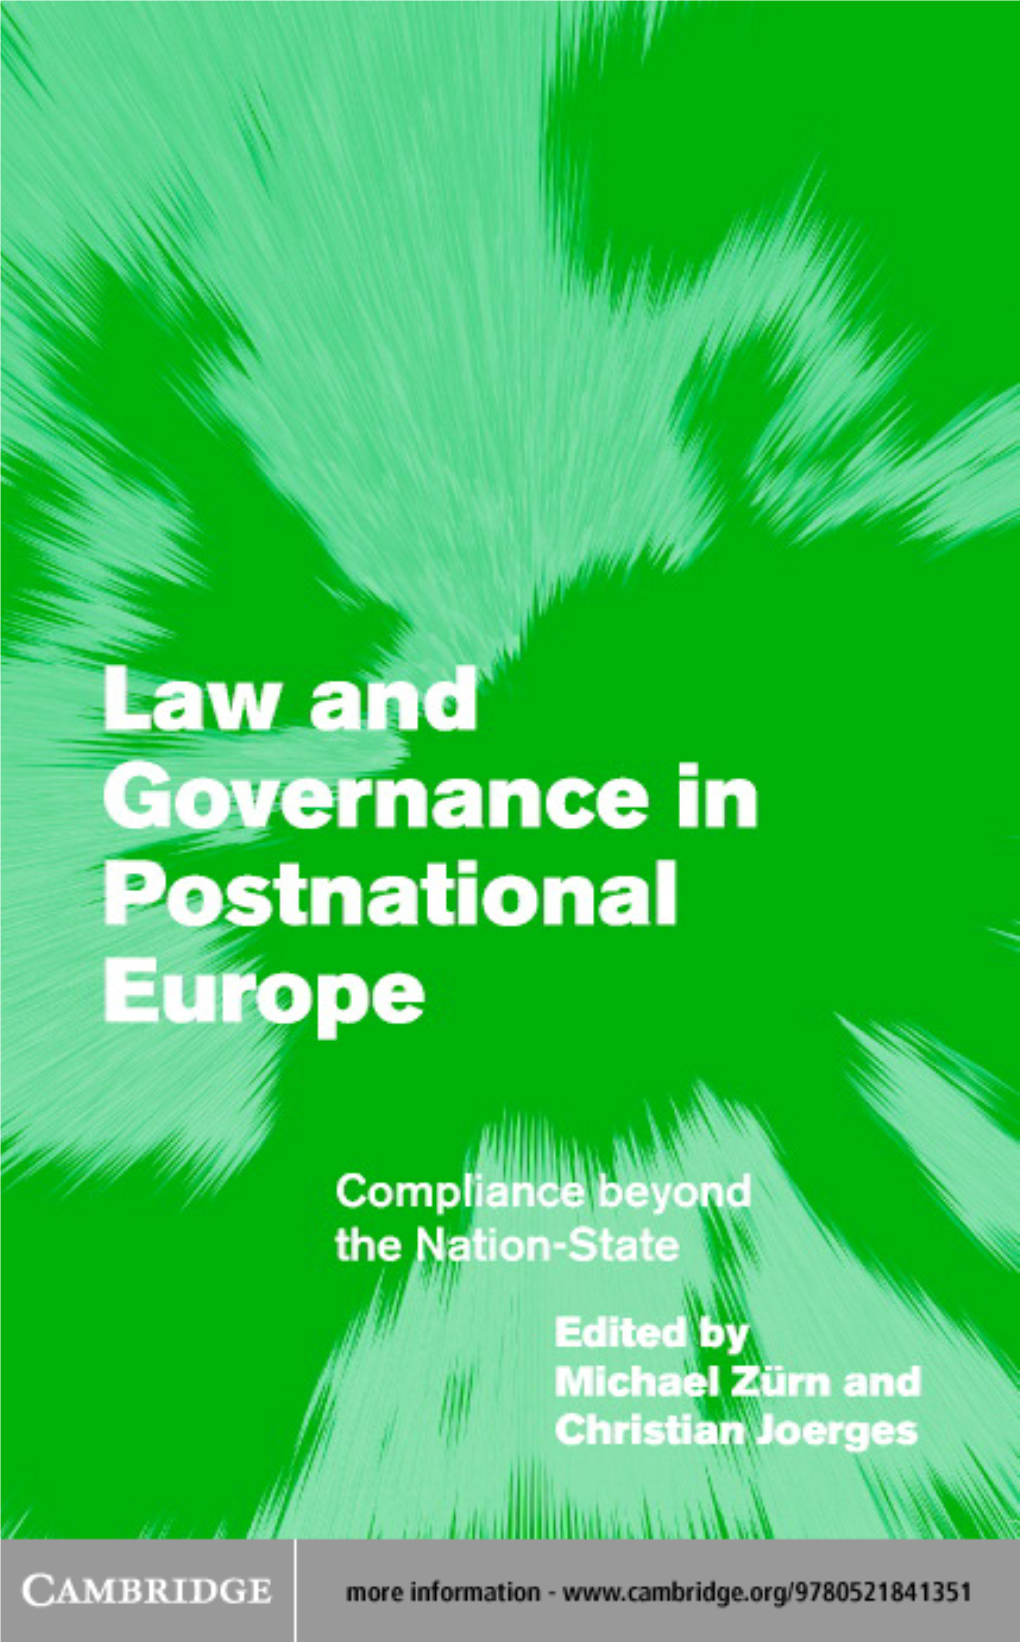 Compliance Beyond the Nation-State